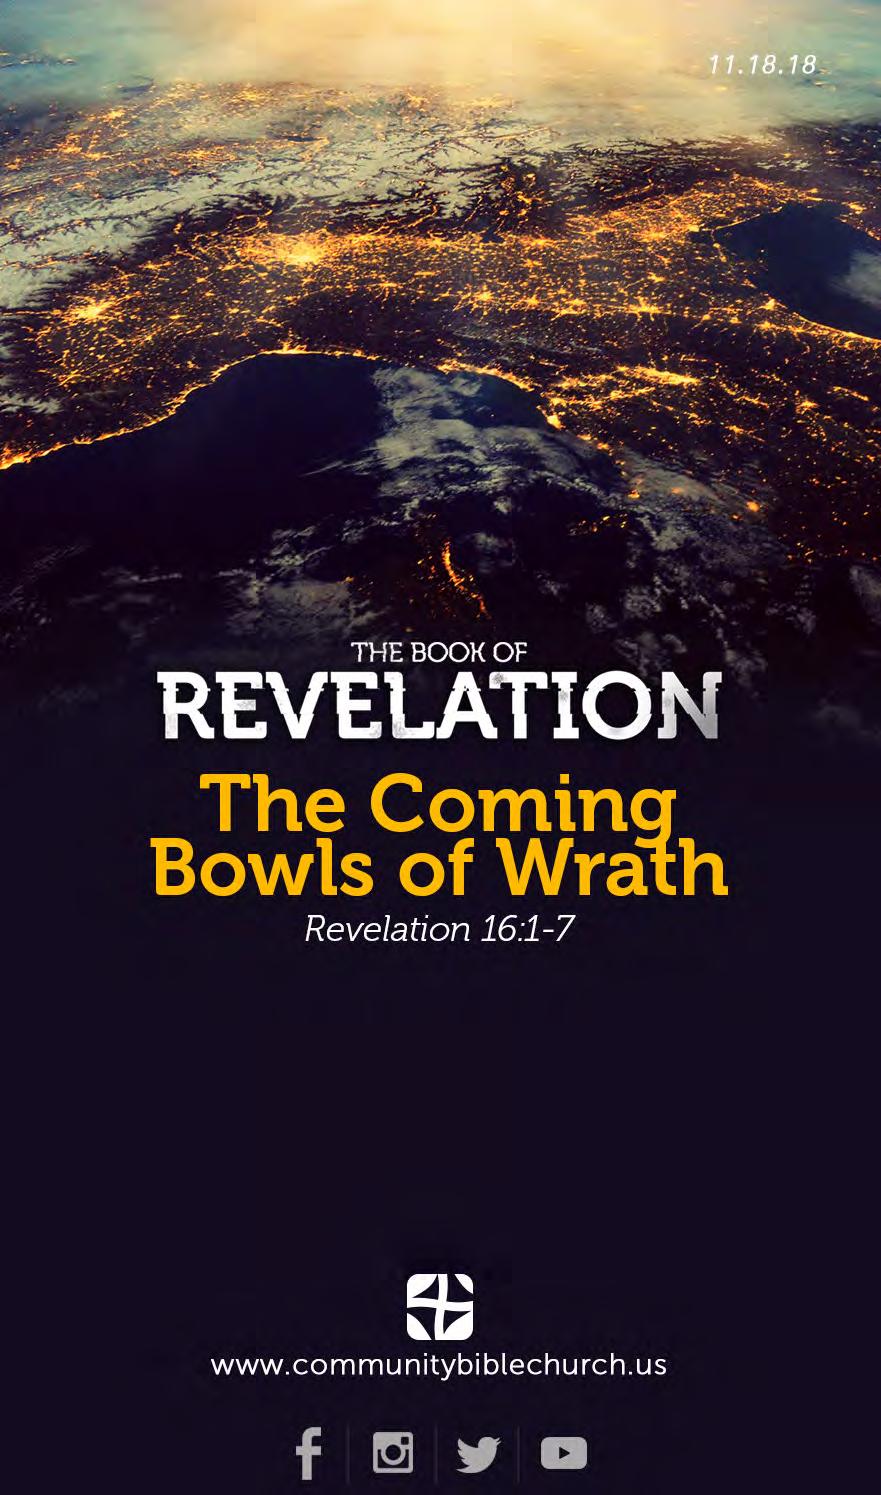 The Coming Bowls of Wrath Revelation 16:1-7 Introduction